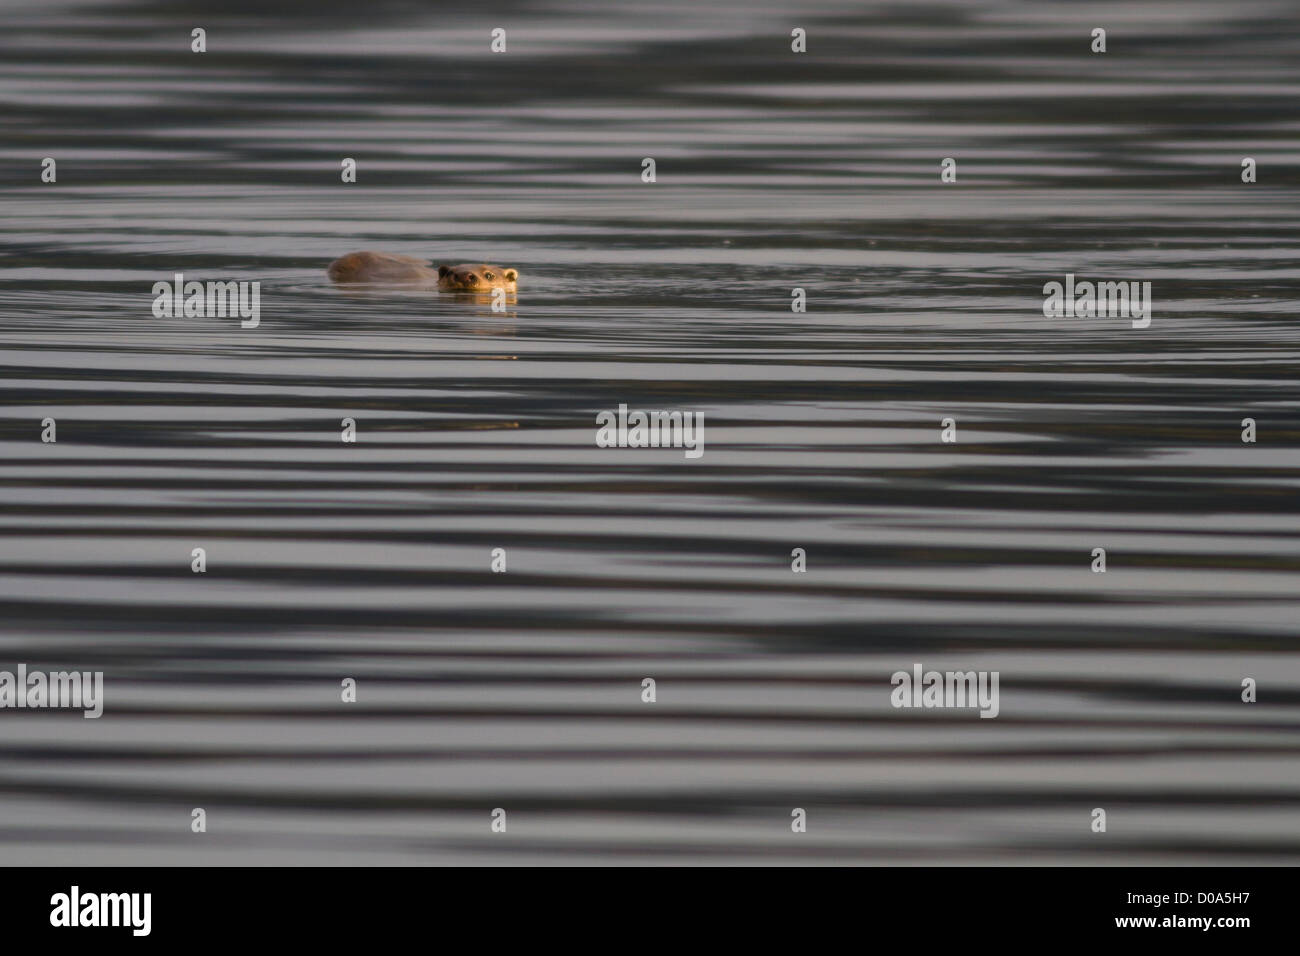 Wild Otter plays at the surface of a sea loch Stock Photo